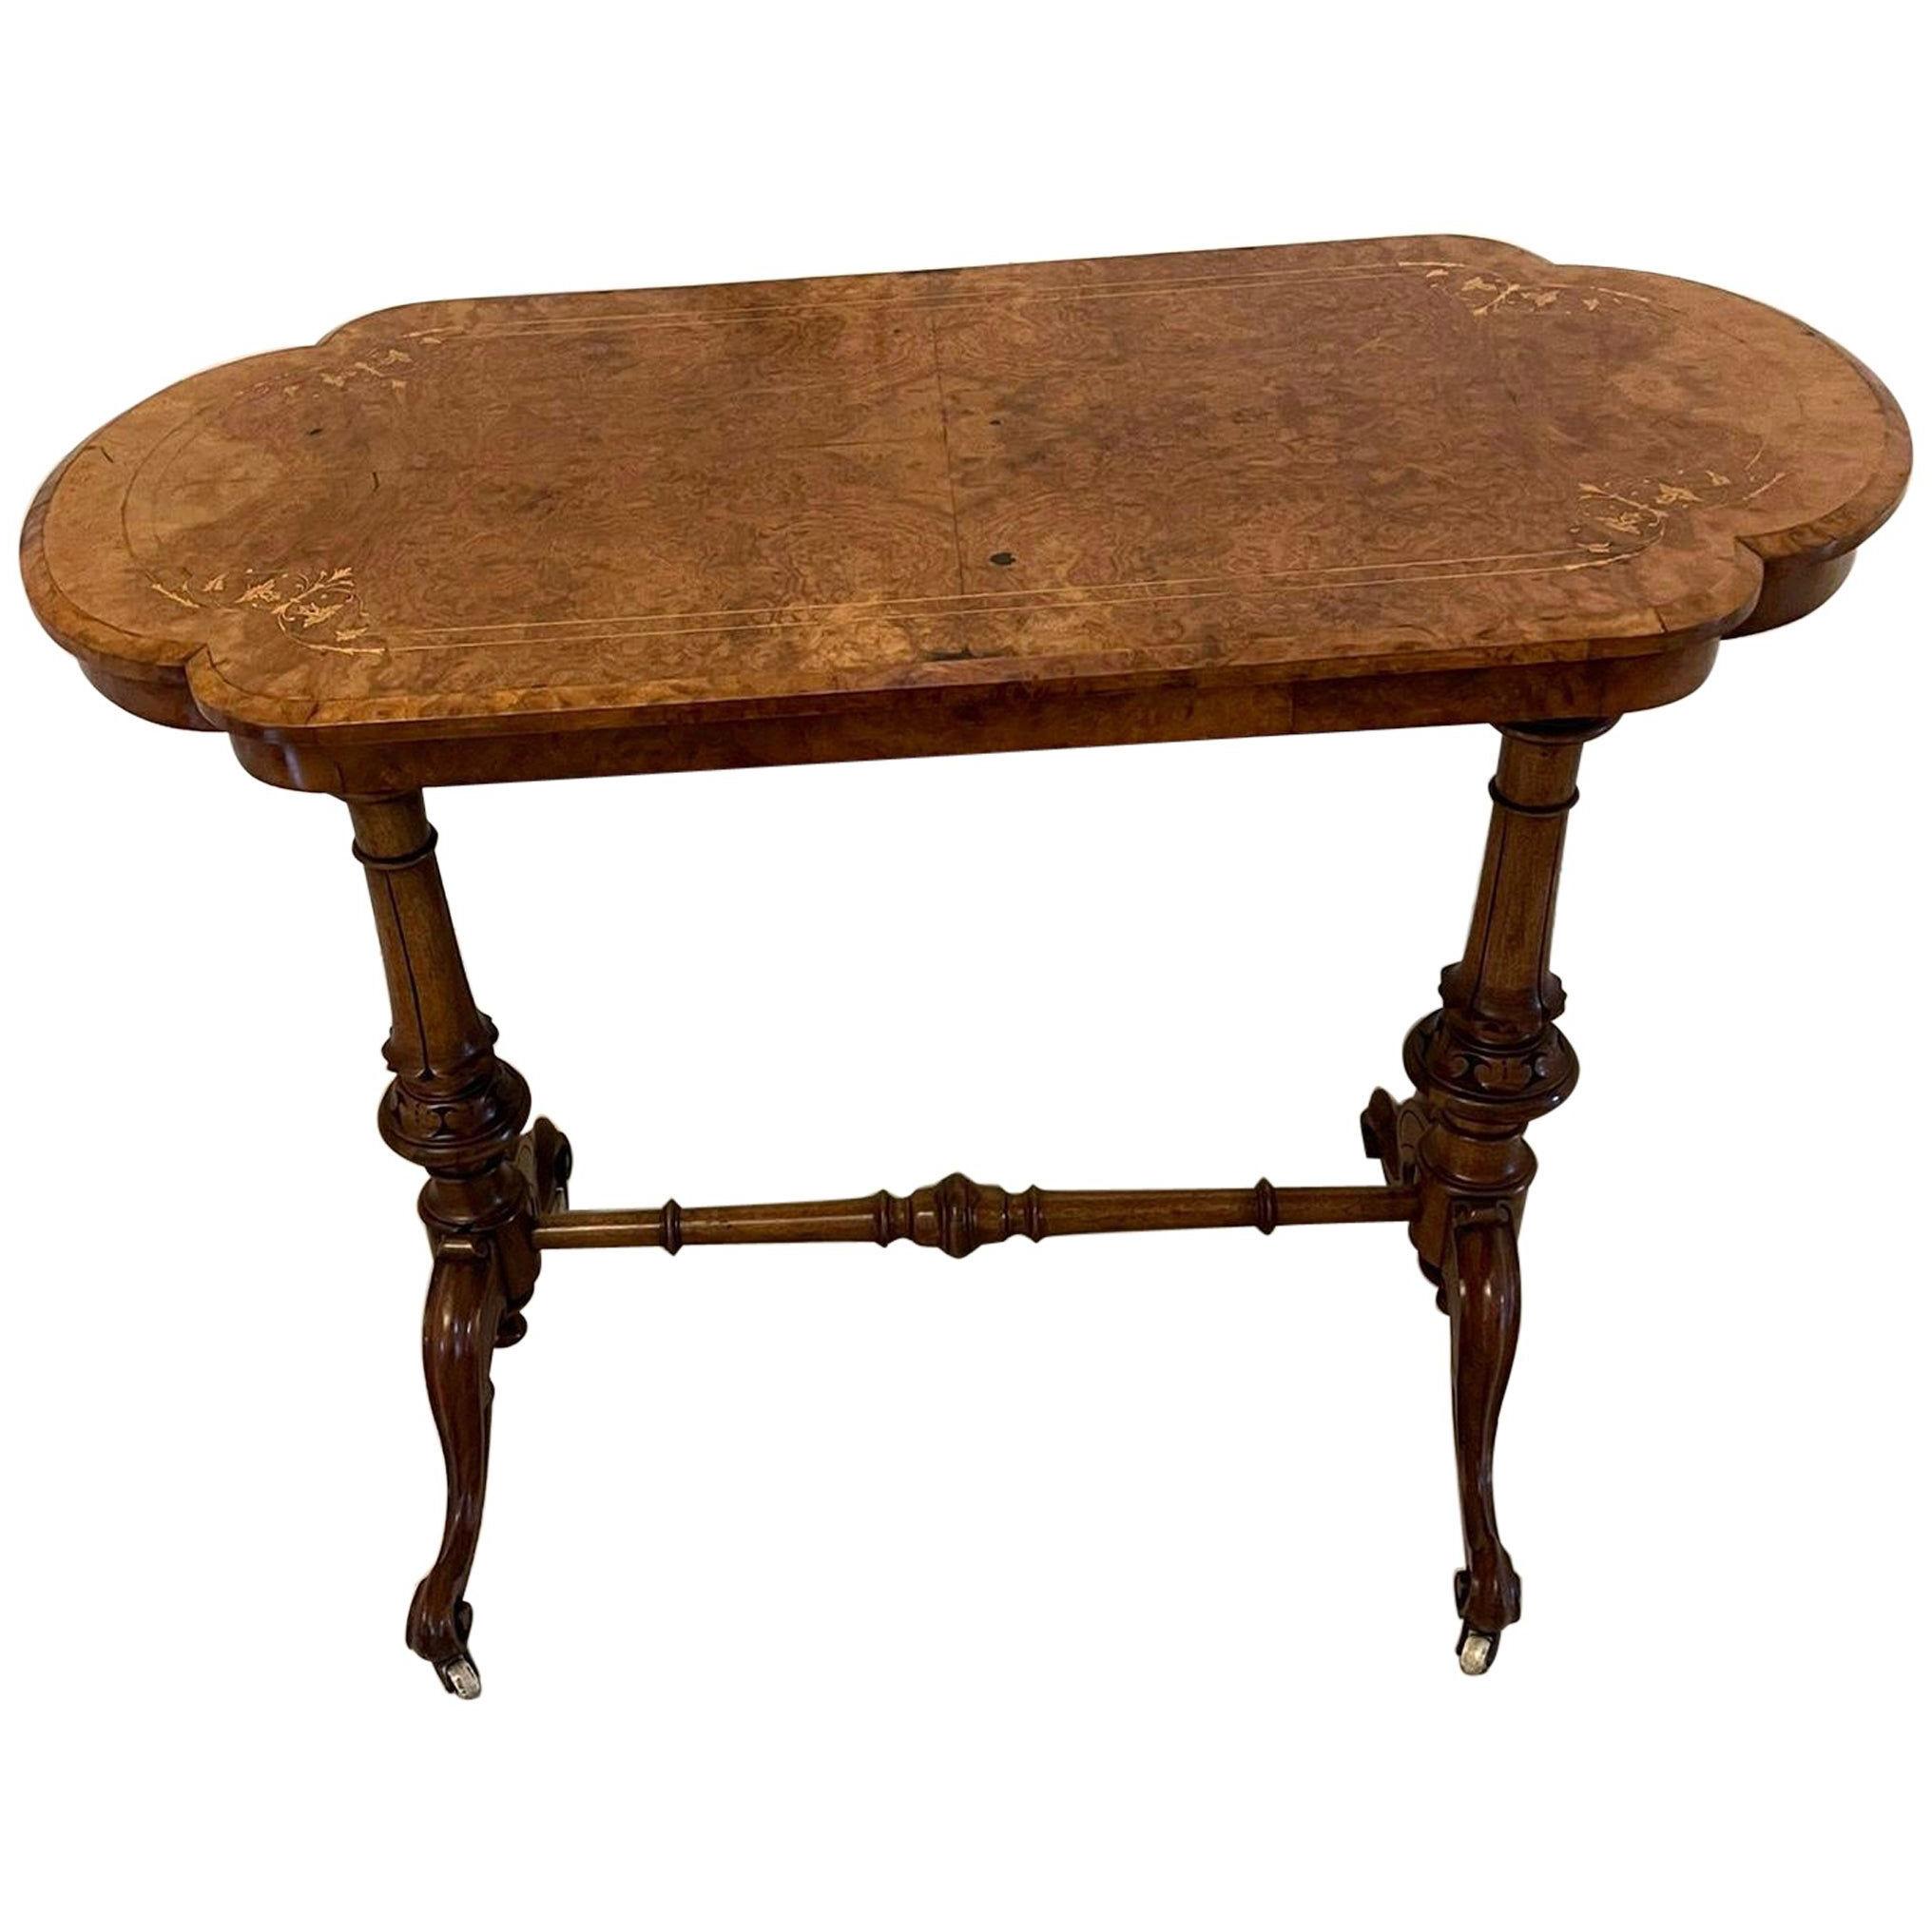 Antique Victorian Quality Burr Walnut Inlaid Freestanding Centre Table